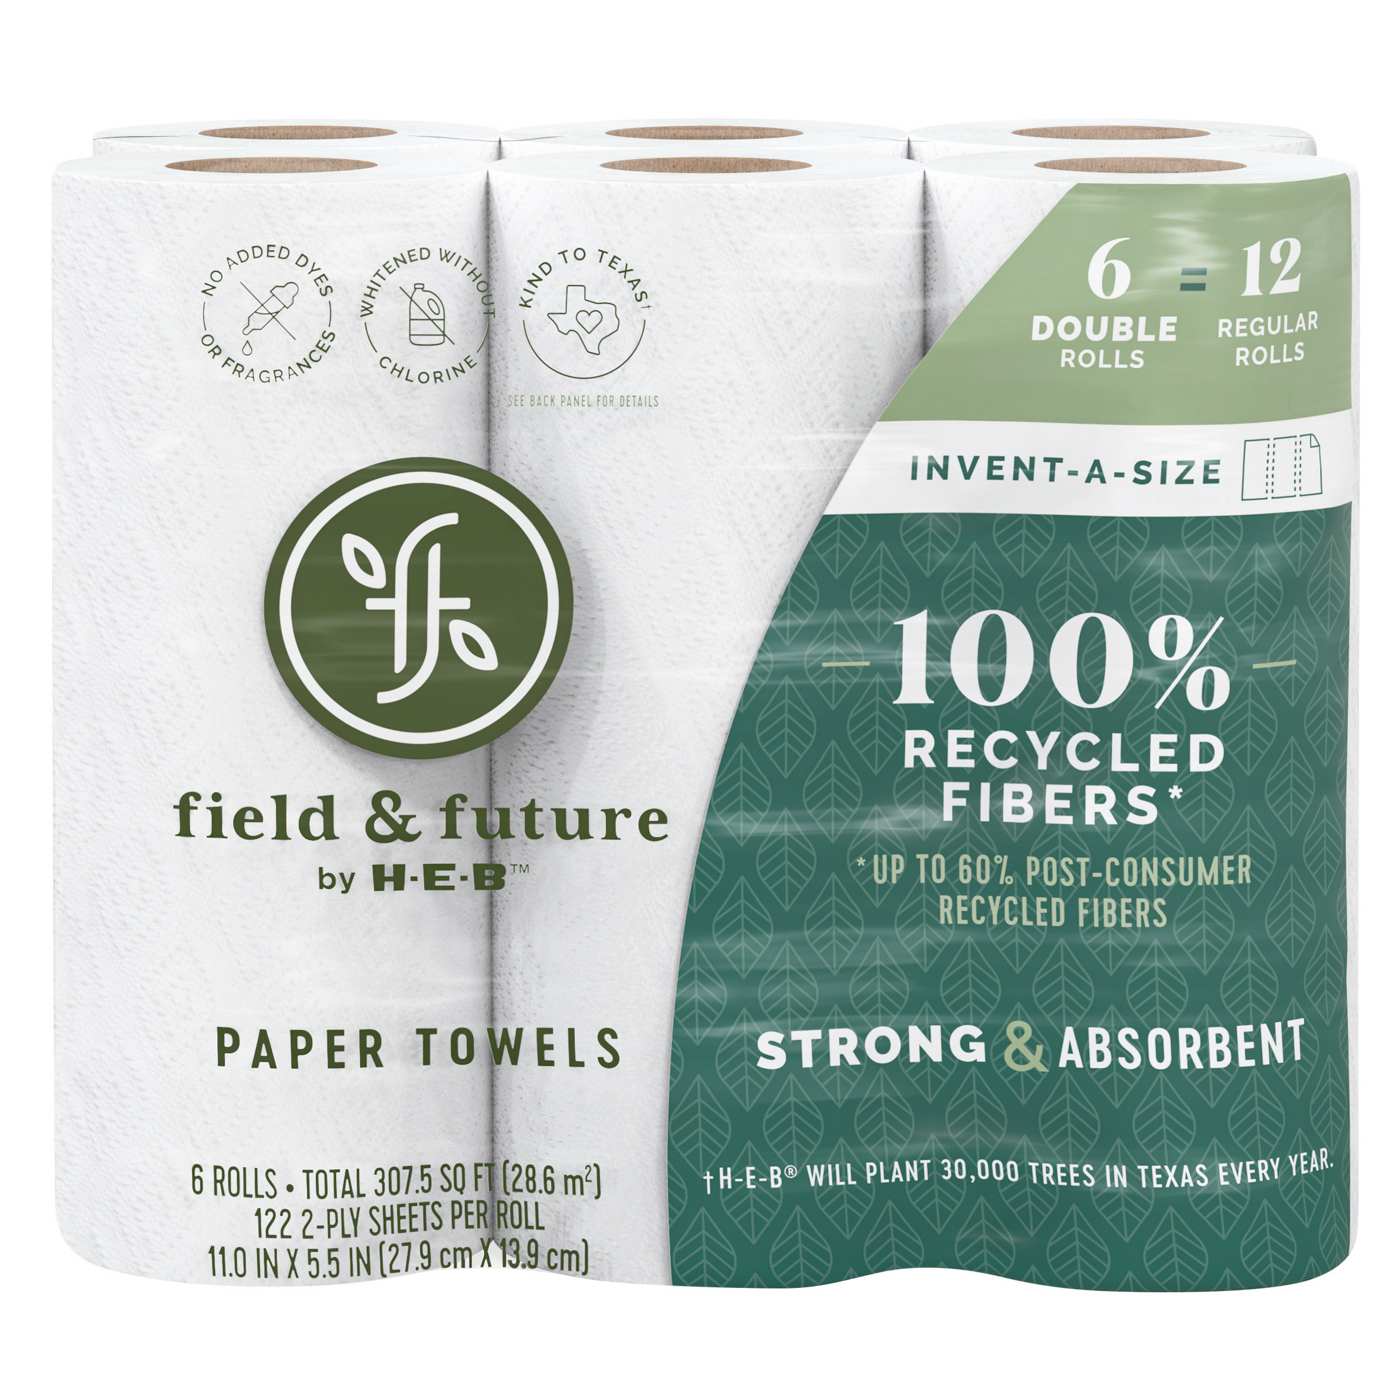 Field & Future by H-E-B Strong & Absorbent Paper Towels; image 1 of 5